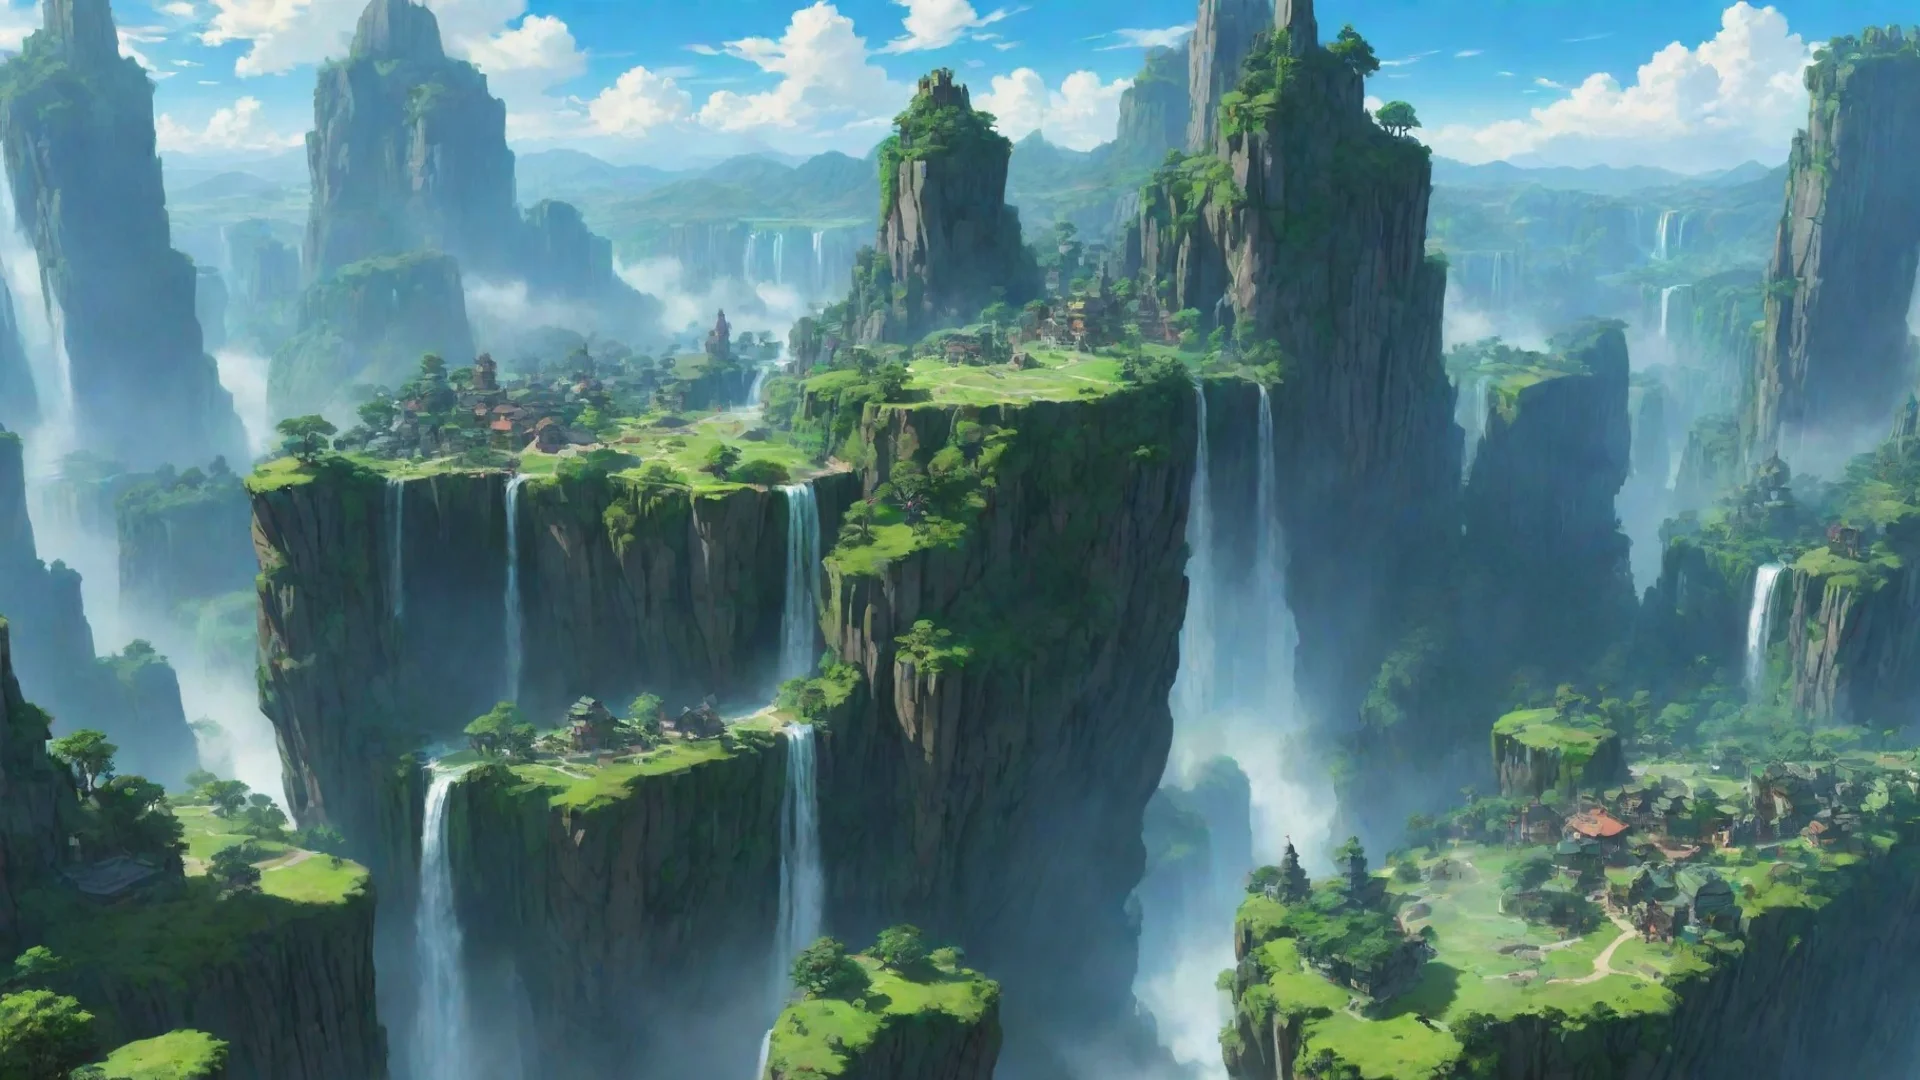 aiartstation art giant green planet in sky anime ghibli city on floating cliffs with waterfalls best hd aesthetic wow confident engaging wow 3 wide